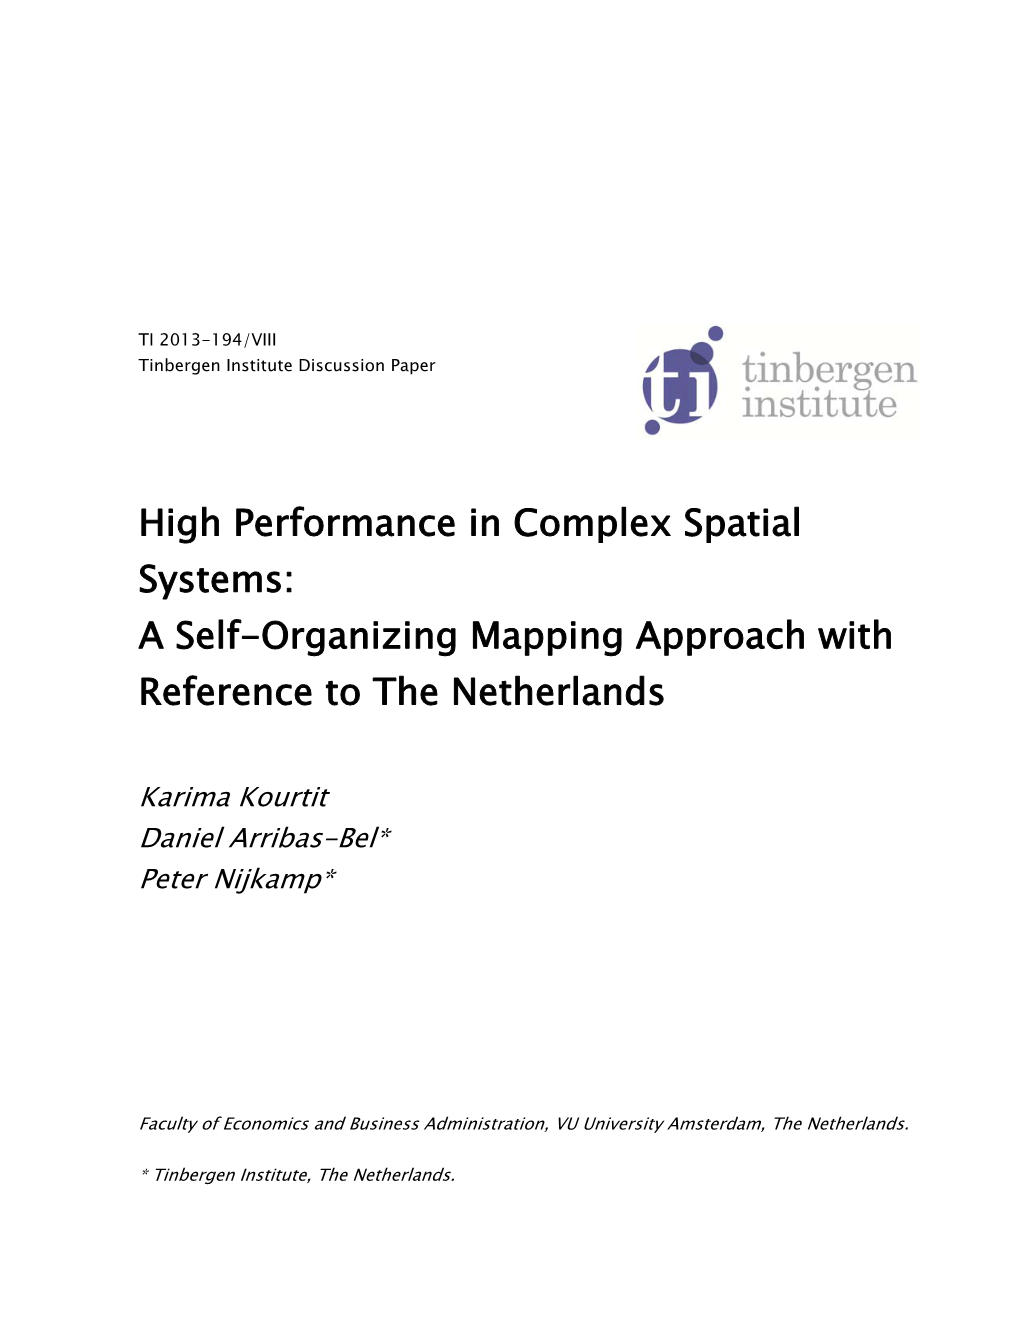 High Performance in Complex Spatial Systems: a Self-Organizing Mapping Approach with Reference to the Netherlands